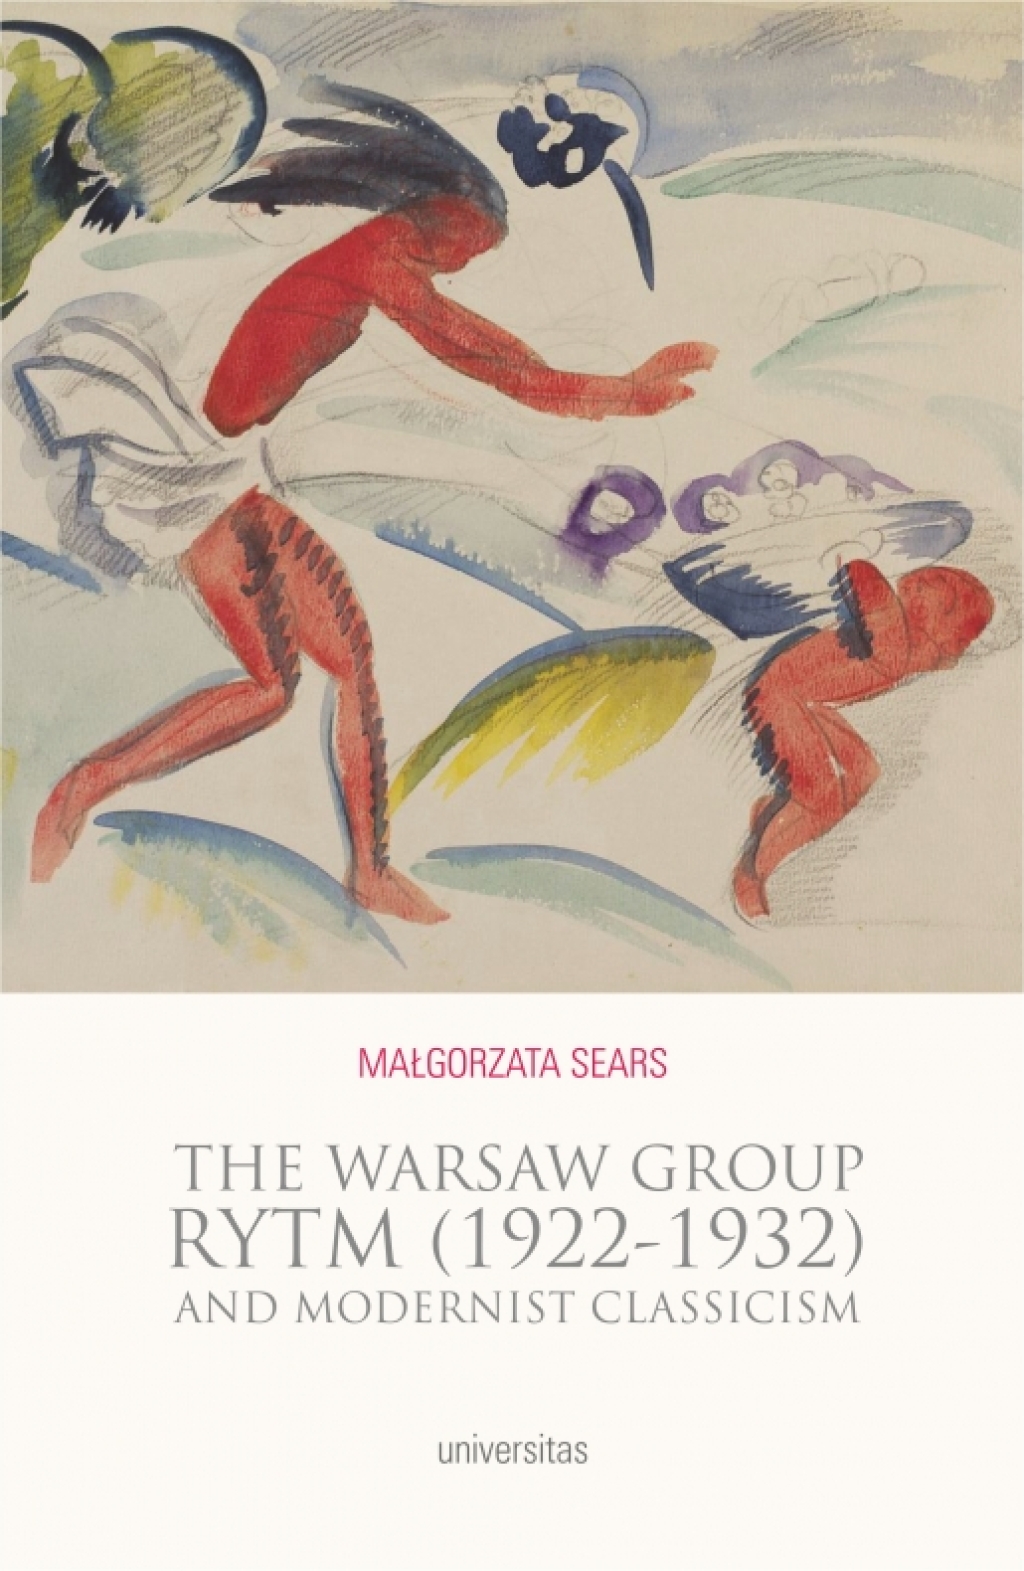 The Warsaw Group Rytm (1922-1932) and Modernist Classicism